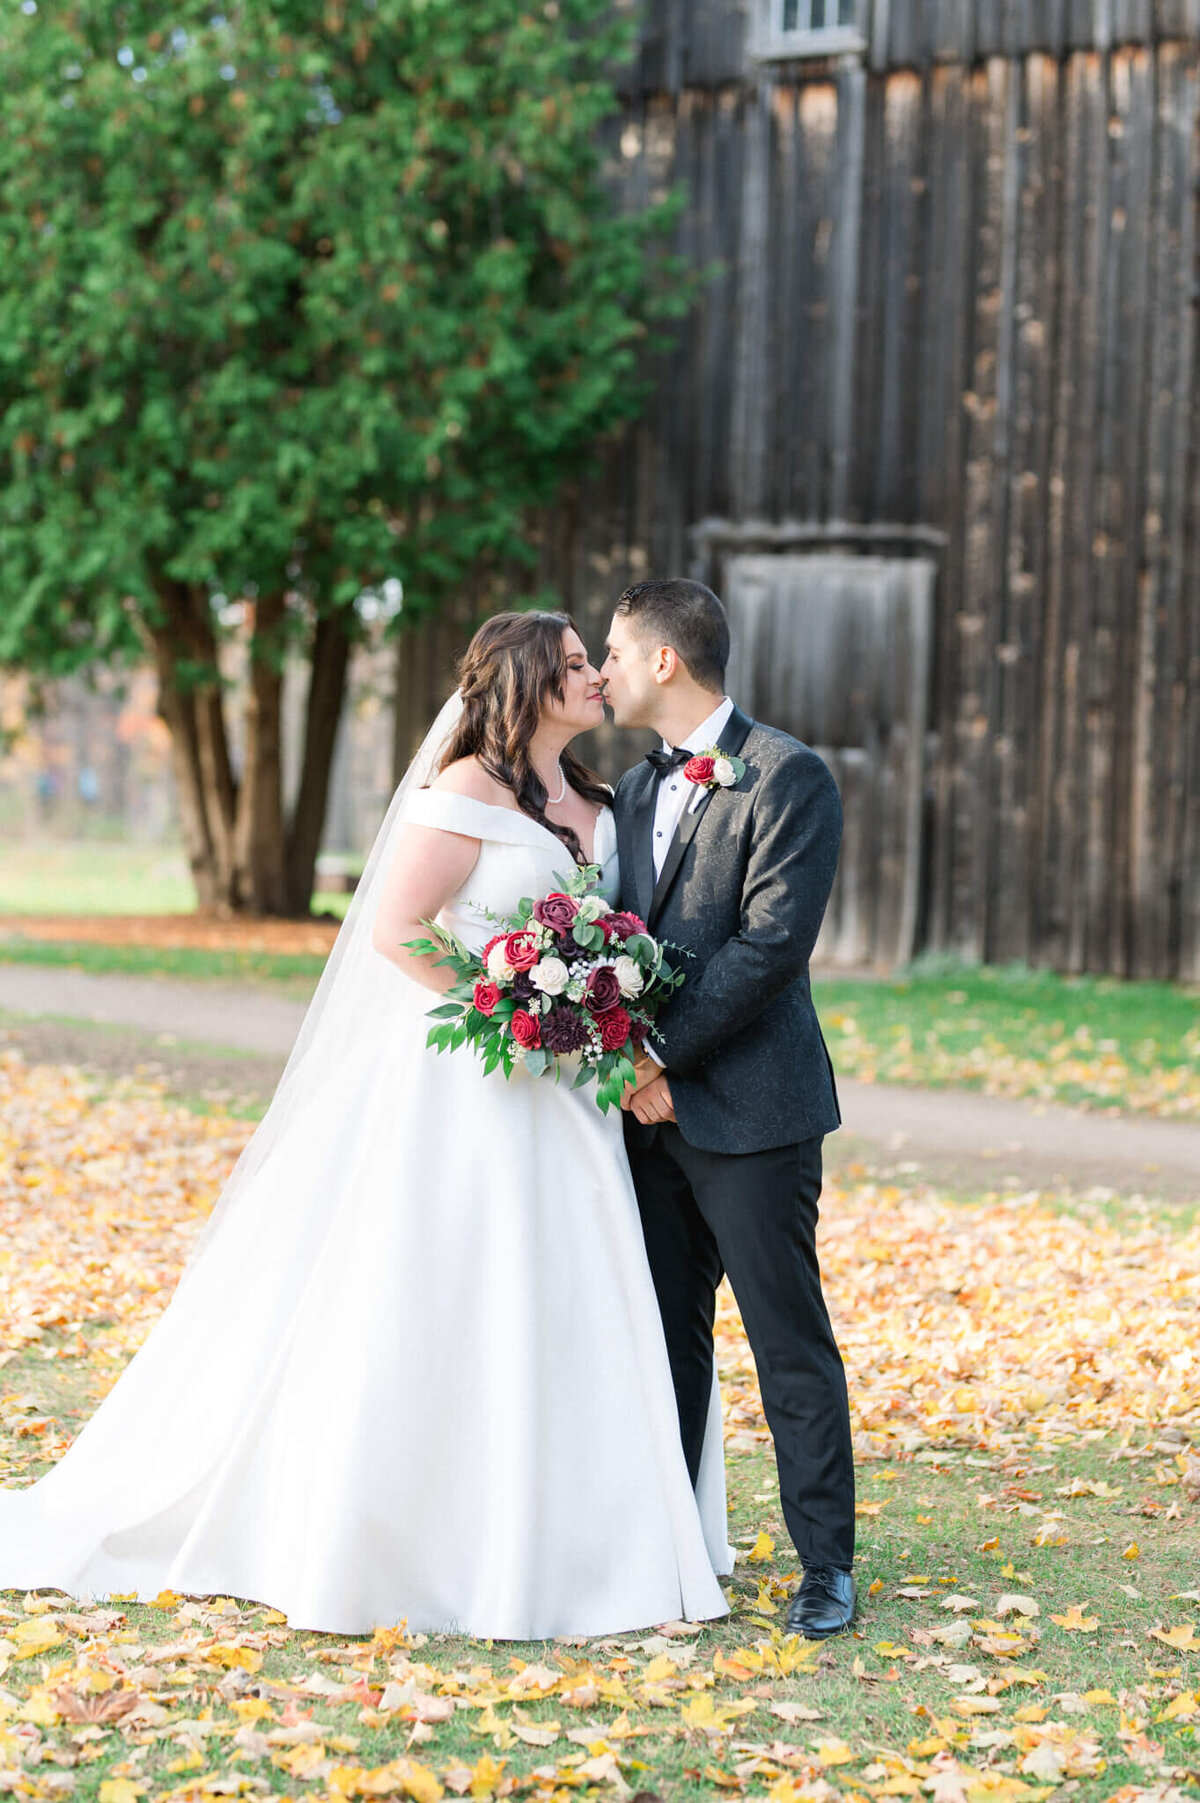 Bride and groom kiss for their wedding portrait captured by Toronto wedding photographer